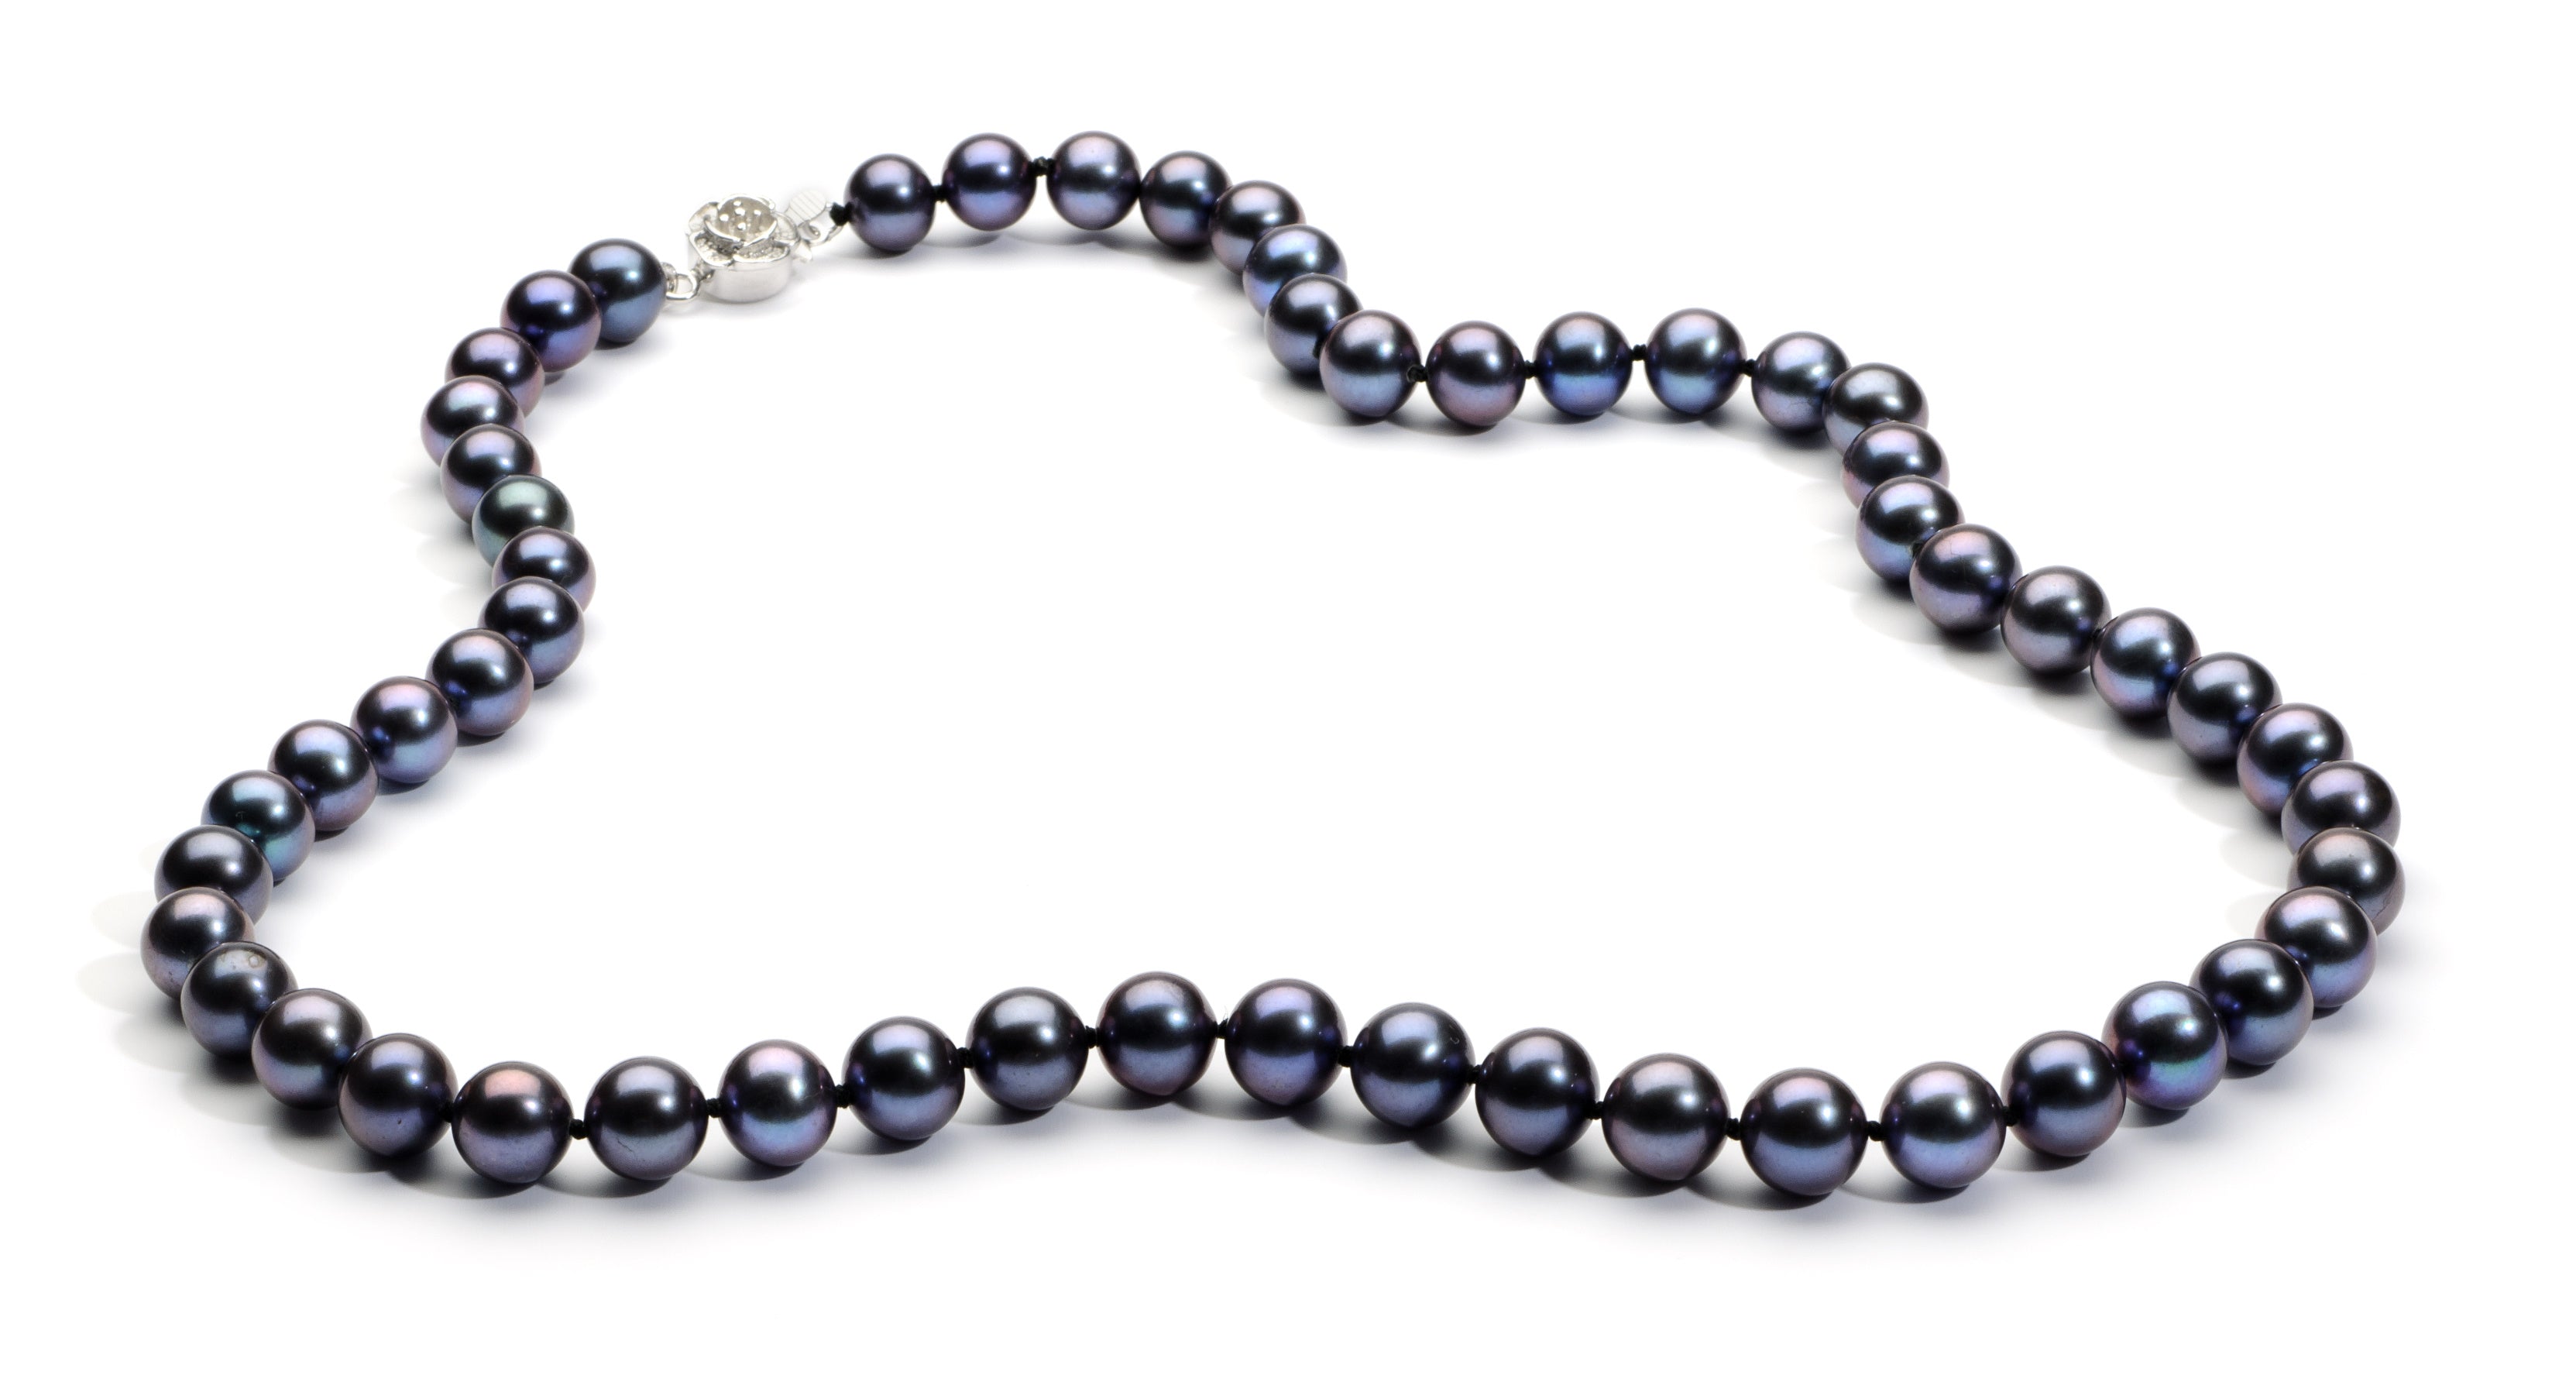 8.0-9.0 mm Black Freshwater Pearl Necklace